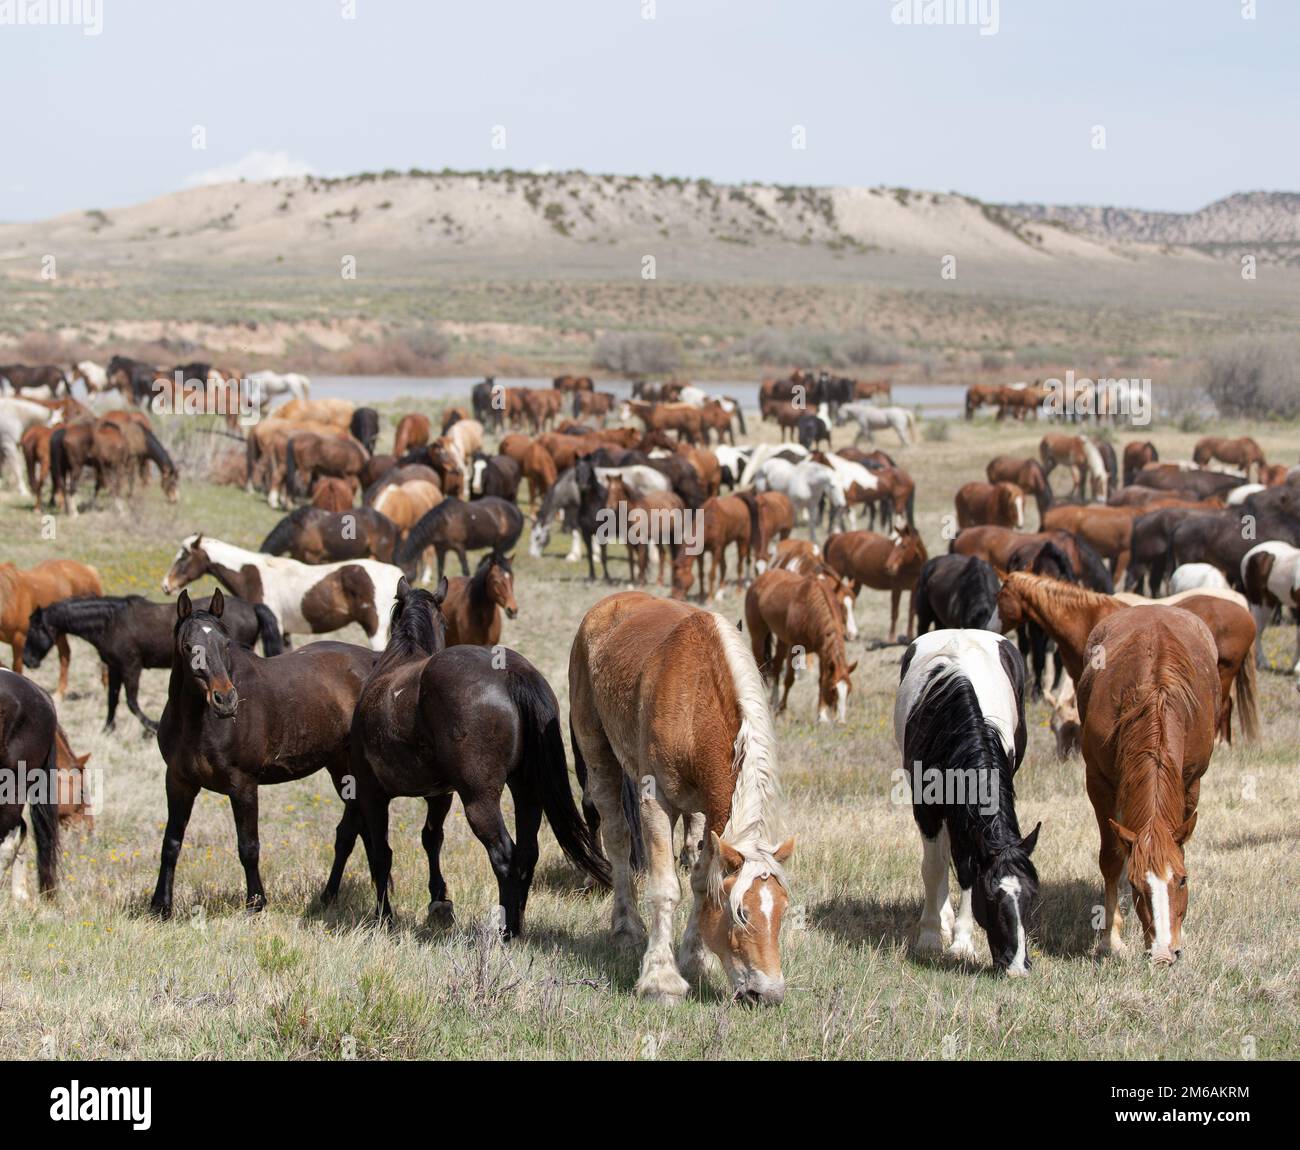 Large herd of horses graze together in valley. Stock Photo